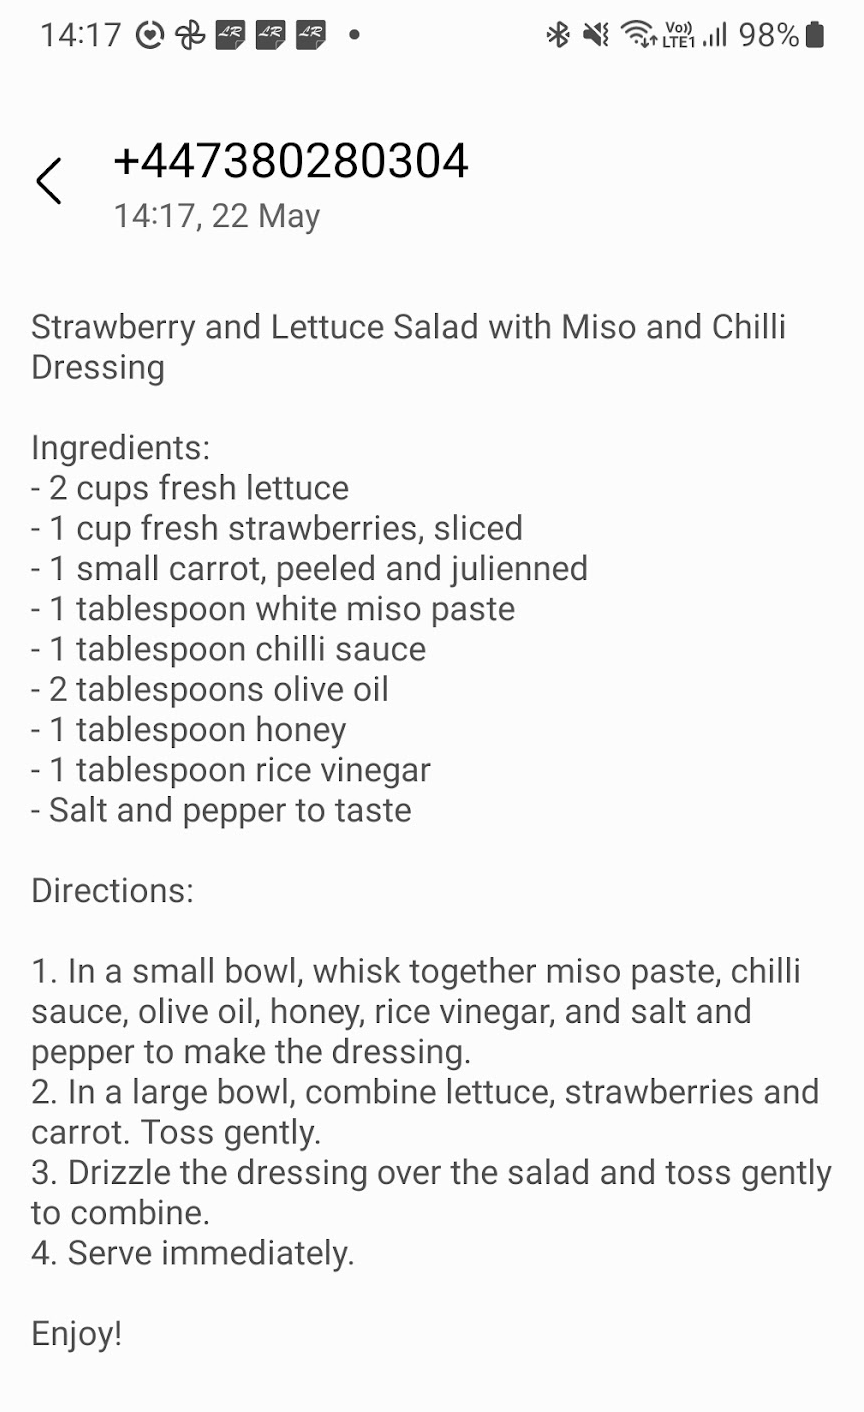 SMS app screenshot. The bot replied with a long recipe for "Strawberry and lettuce salad with miso and chilli dressing", adding a a few more ingredients including honey and a pretty reasonable "mix and toss" salad recipe.